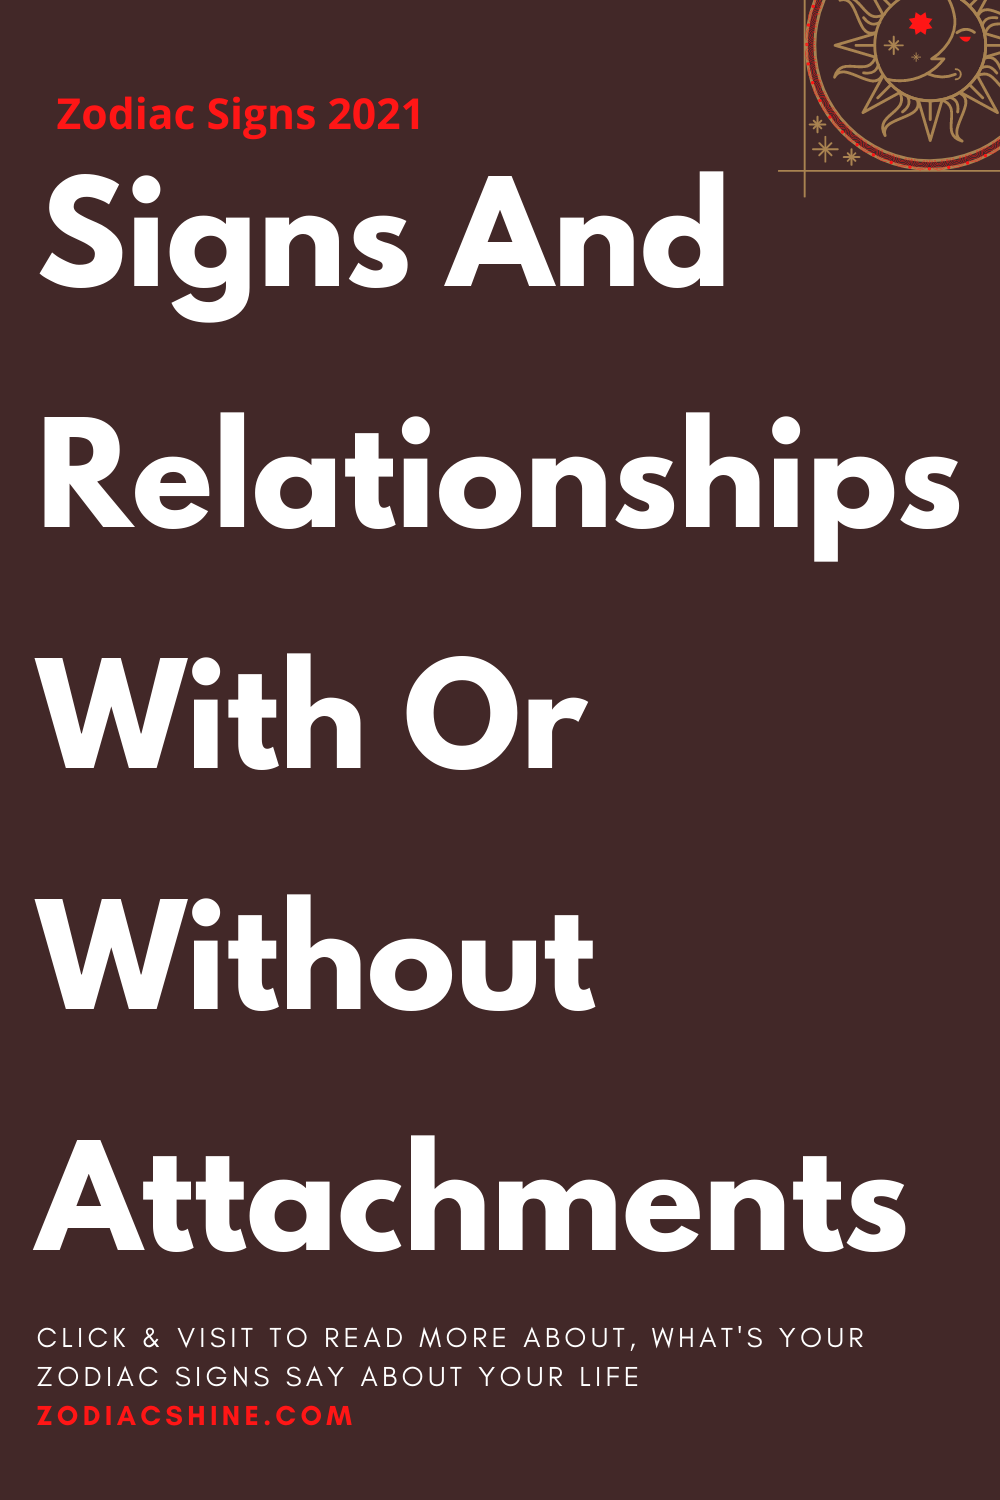 Signs And Relationships With Or Without Attachments